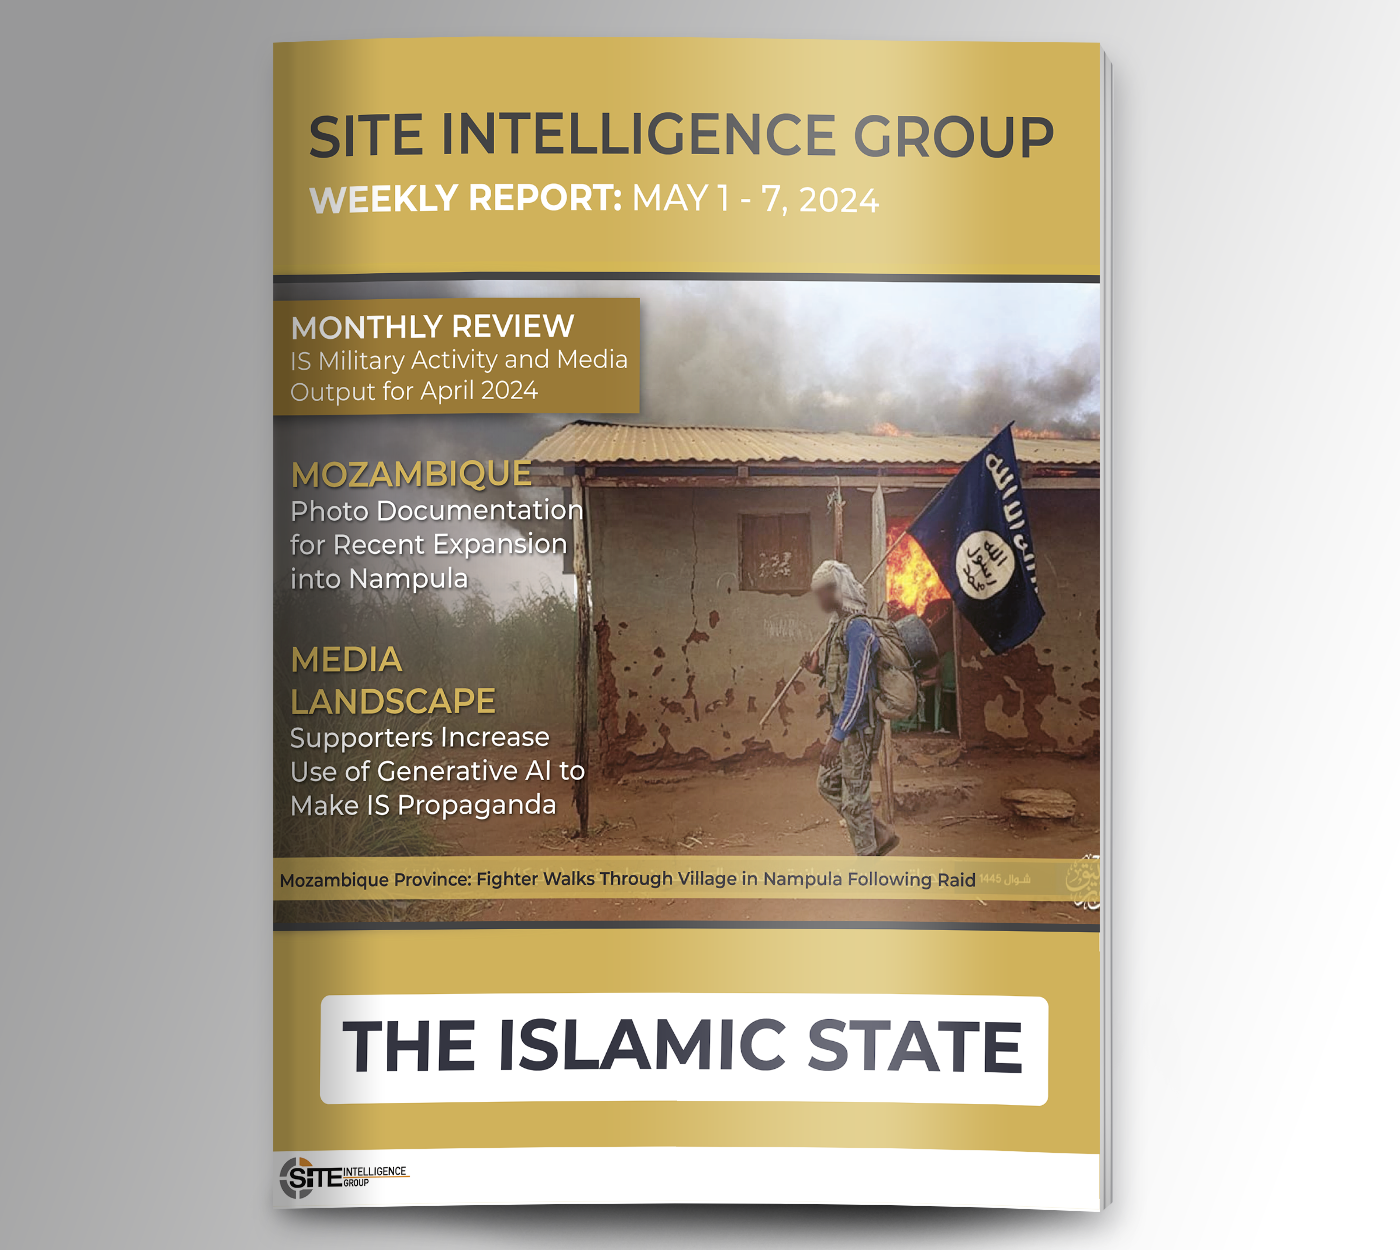 Weekly inSITE on the Islamic State for May 1-7, 2024